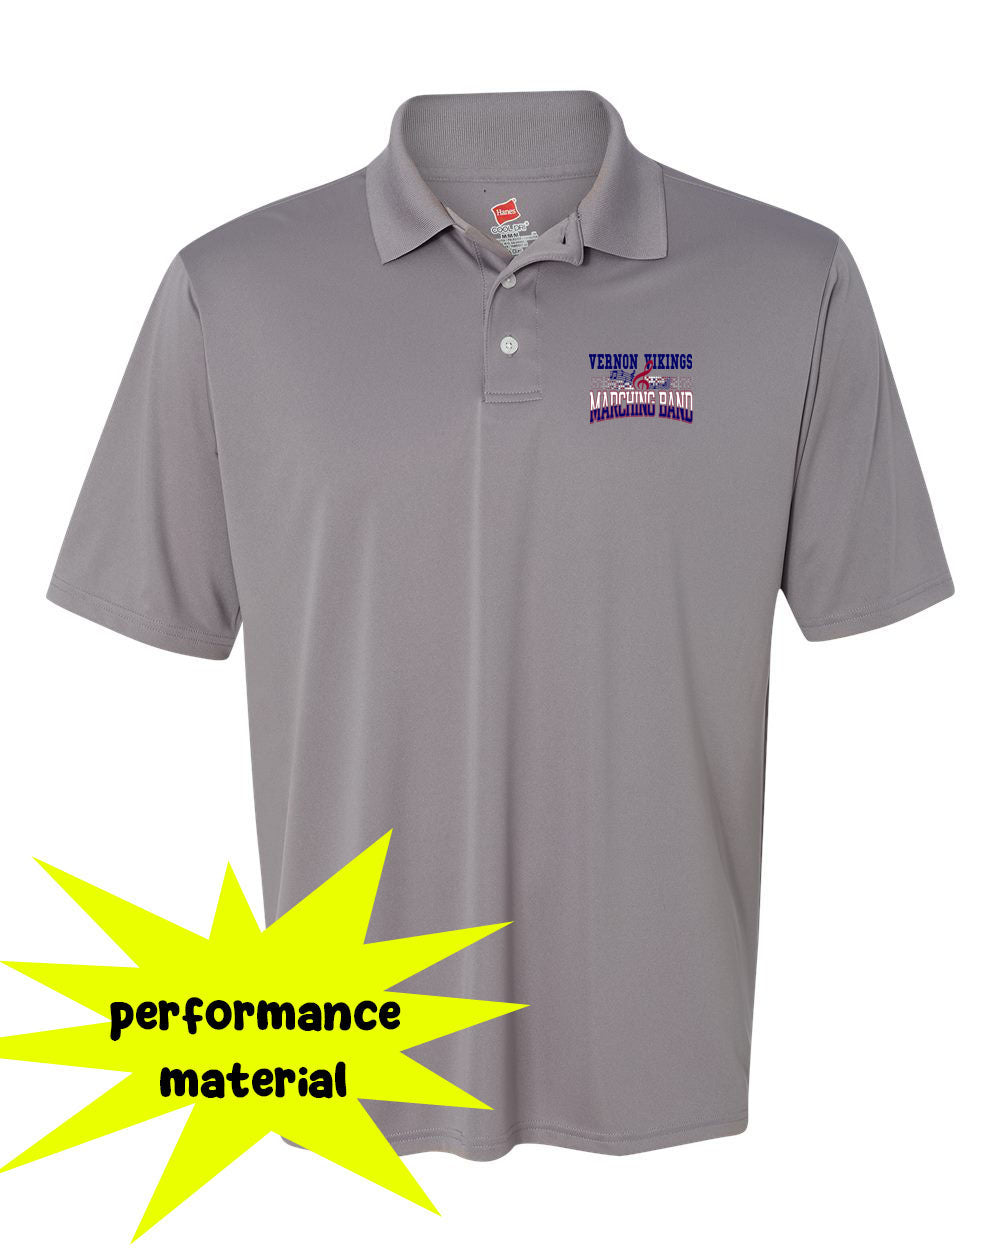 Vernon Marching Band Performance Material Polo T-Shirt Design 6